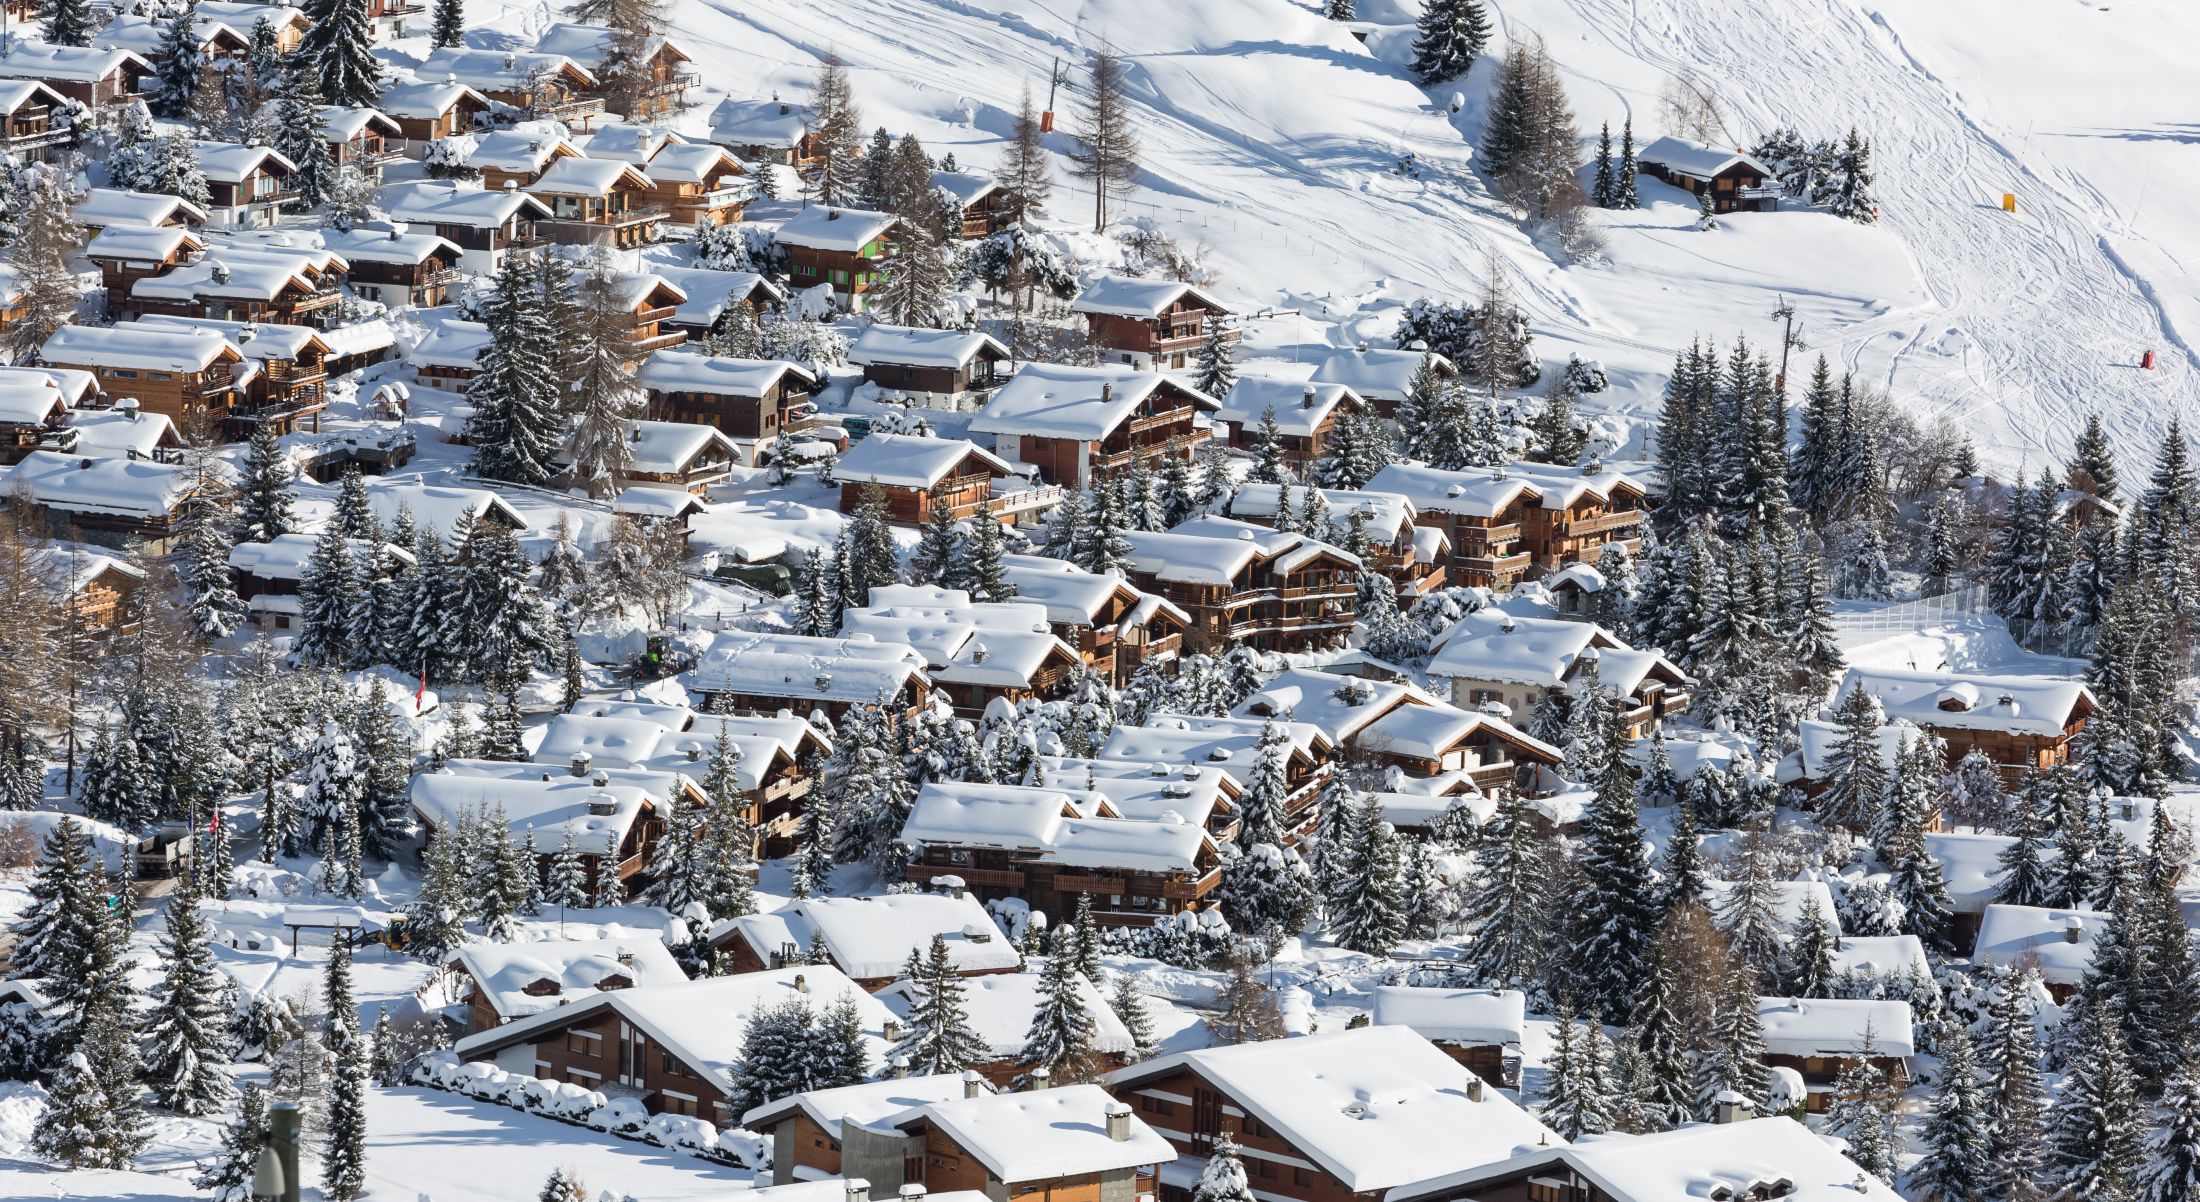 The rows of luxury chalets in Verbier display how it is a high end resort and how, each luxury chalet offers an uninterrupted view out to the mountains.